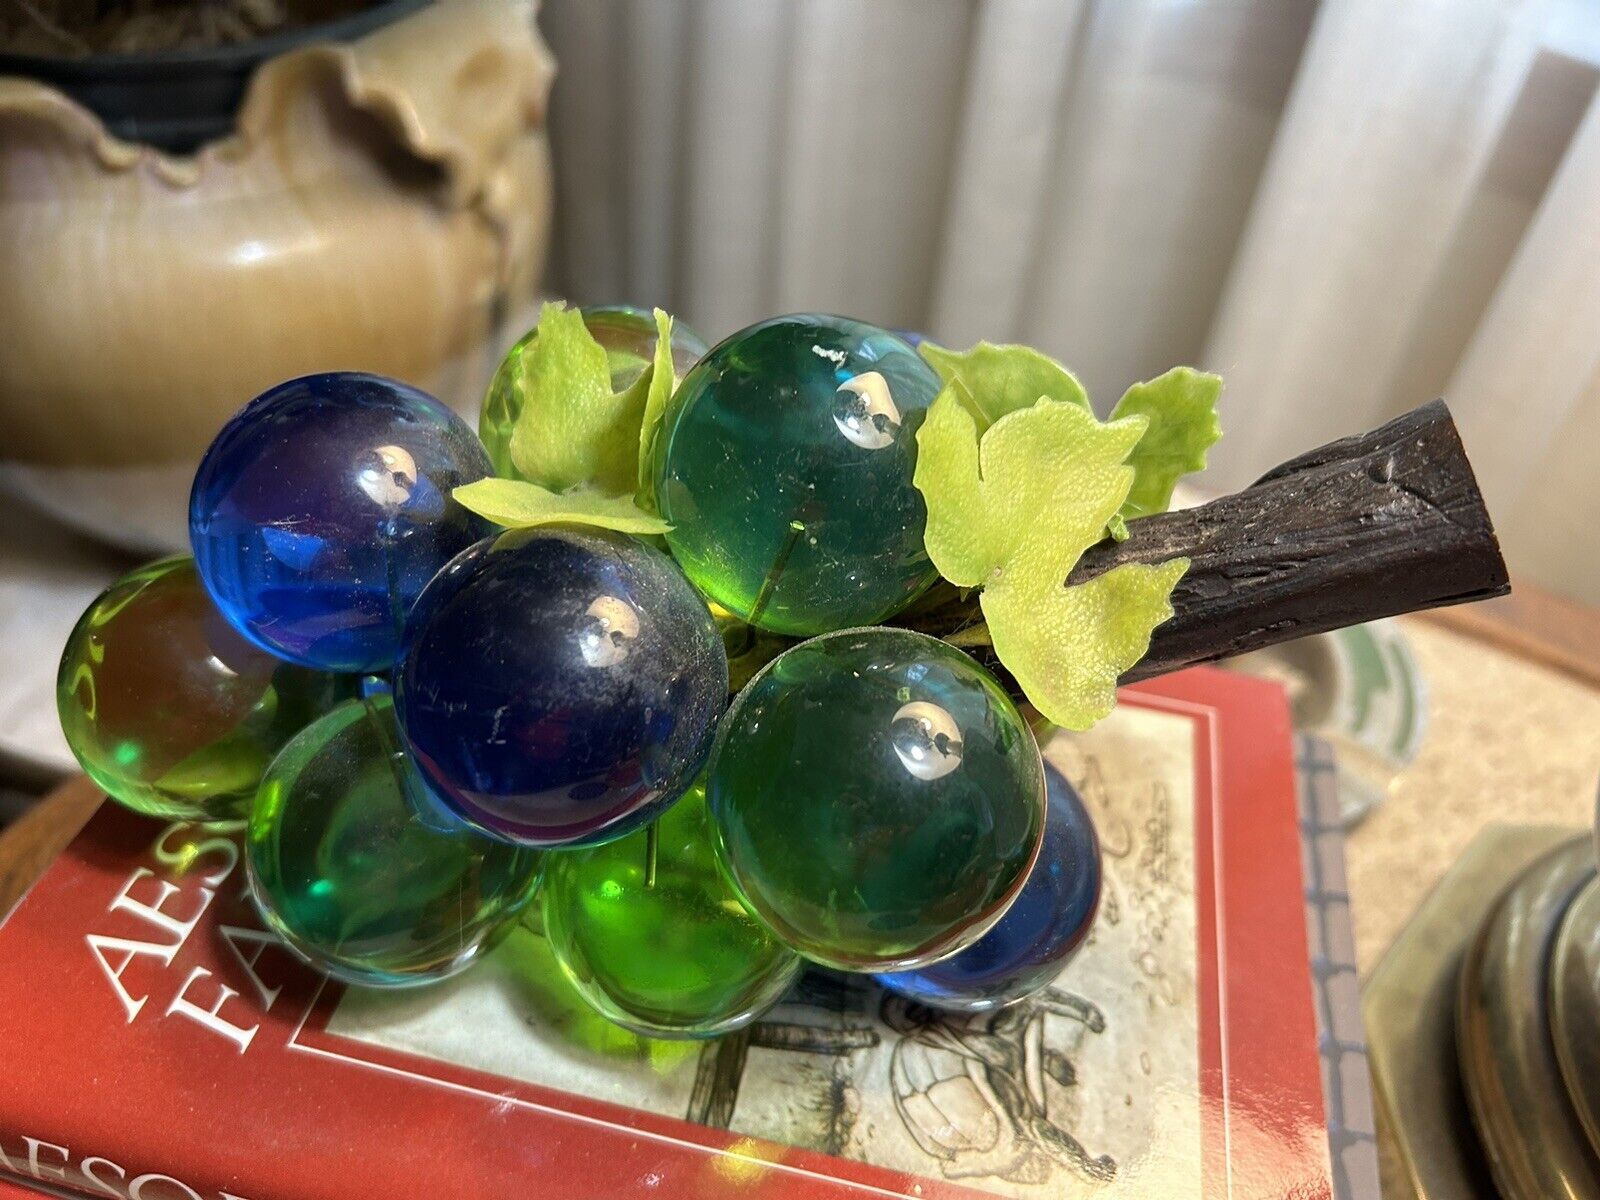 Vintage Lucite Grapes Blue/Green w/stem, 8” Long x 5” Wide. Very Mid-Century Mod